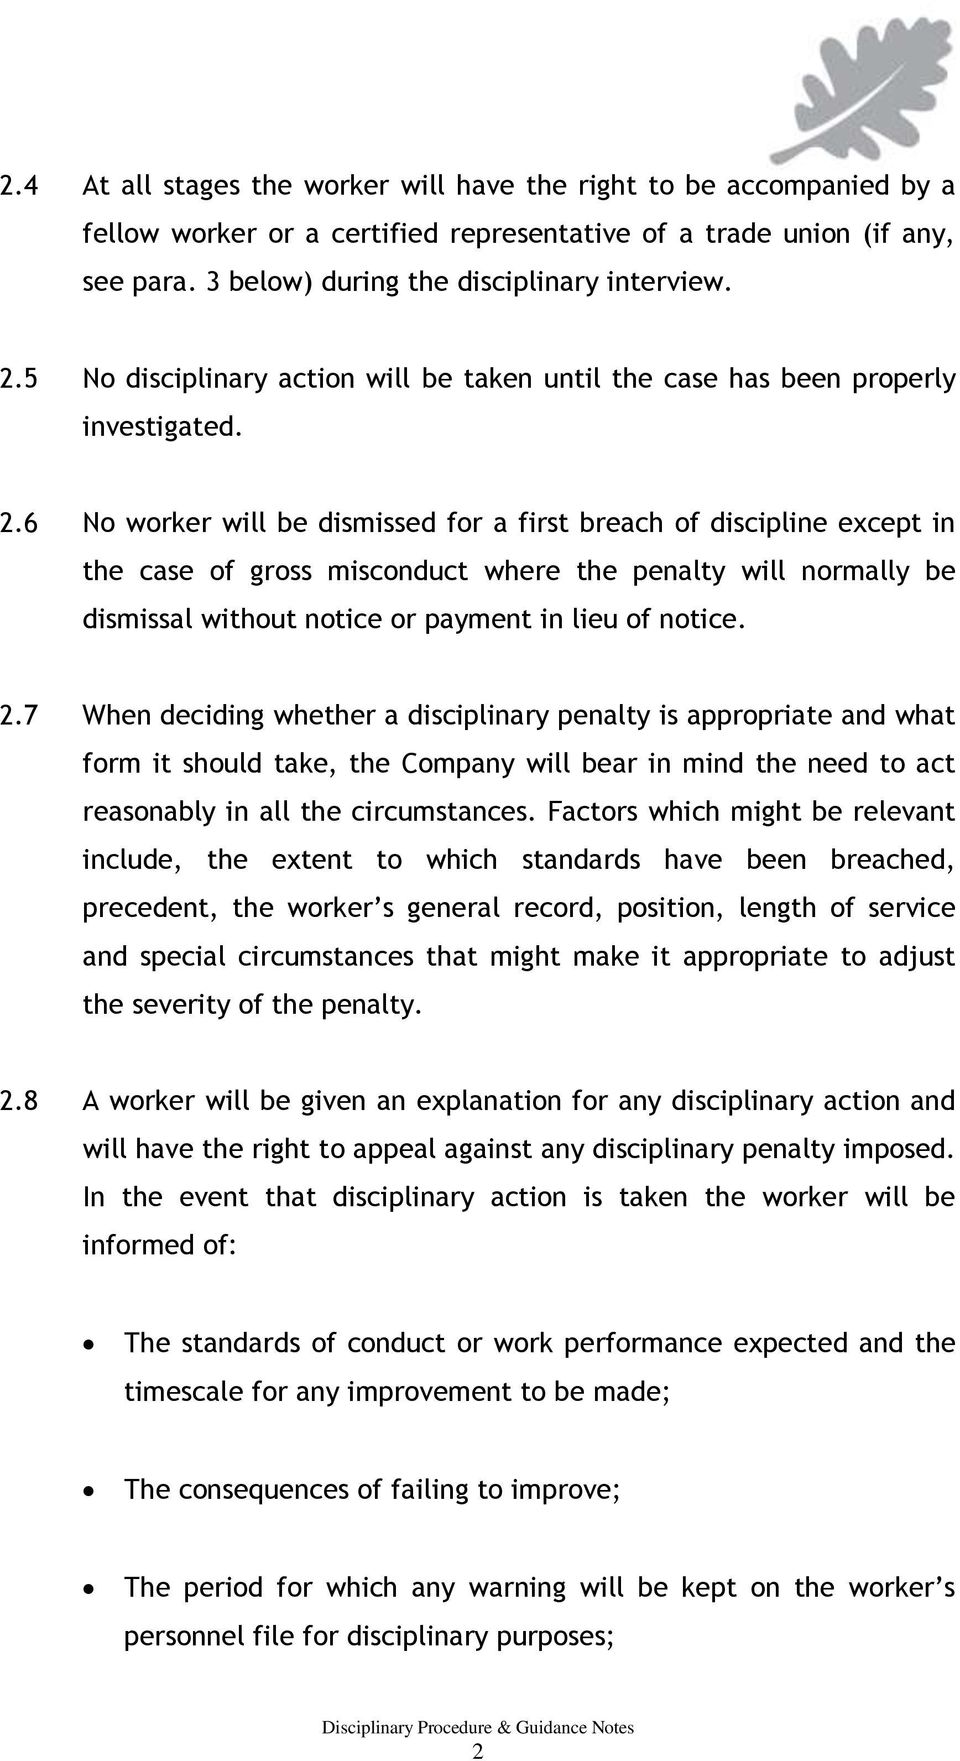 6 No worker will be dismissed for a first breach of discipline except in the case of gross misconduct where the penalty will normally be dismissal without notice or payment in lieu of notice. 2.